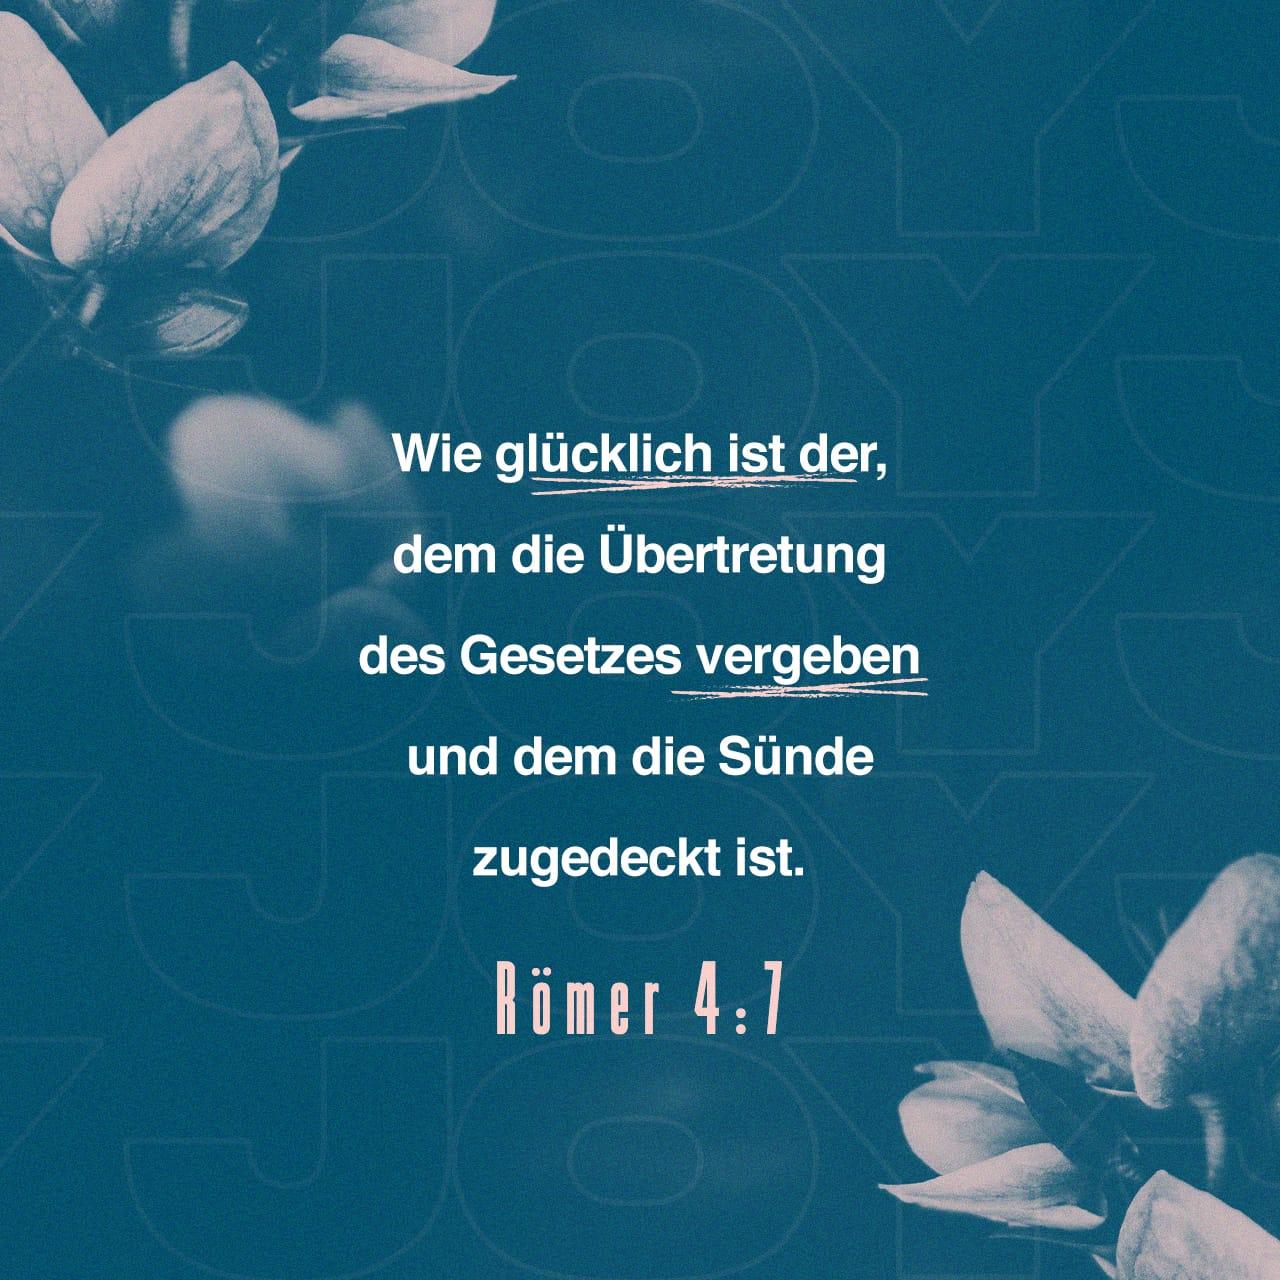 Bible Verse of the Day - day 87 - image 31507 (Römer 4:1-25)